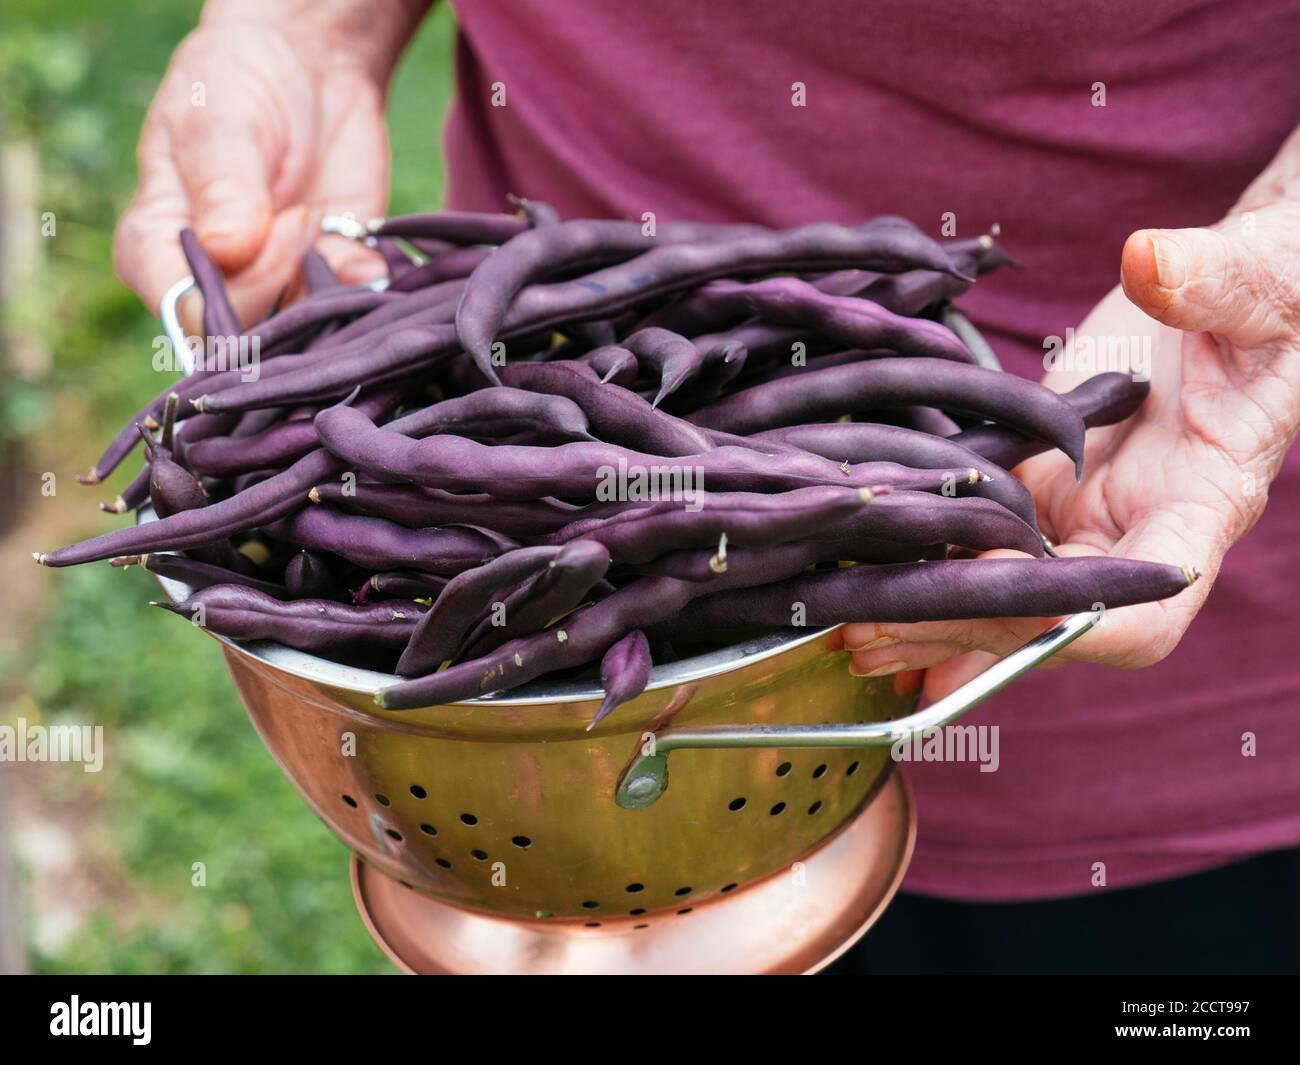 Gardener with a colander full of purple bean pods. Stock Photo